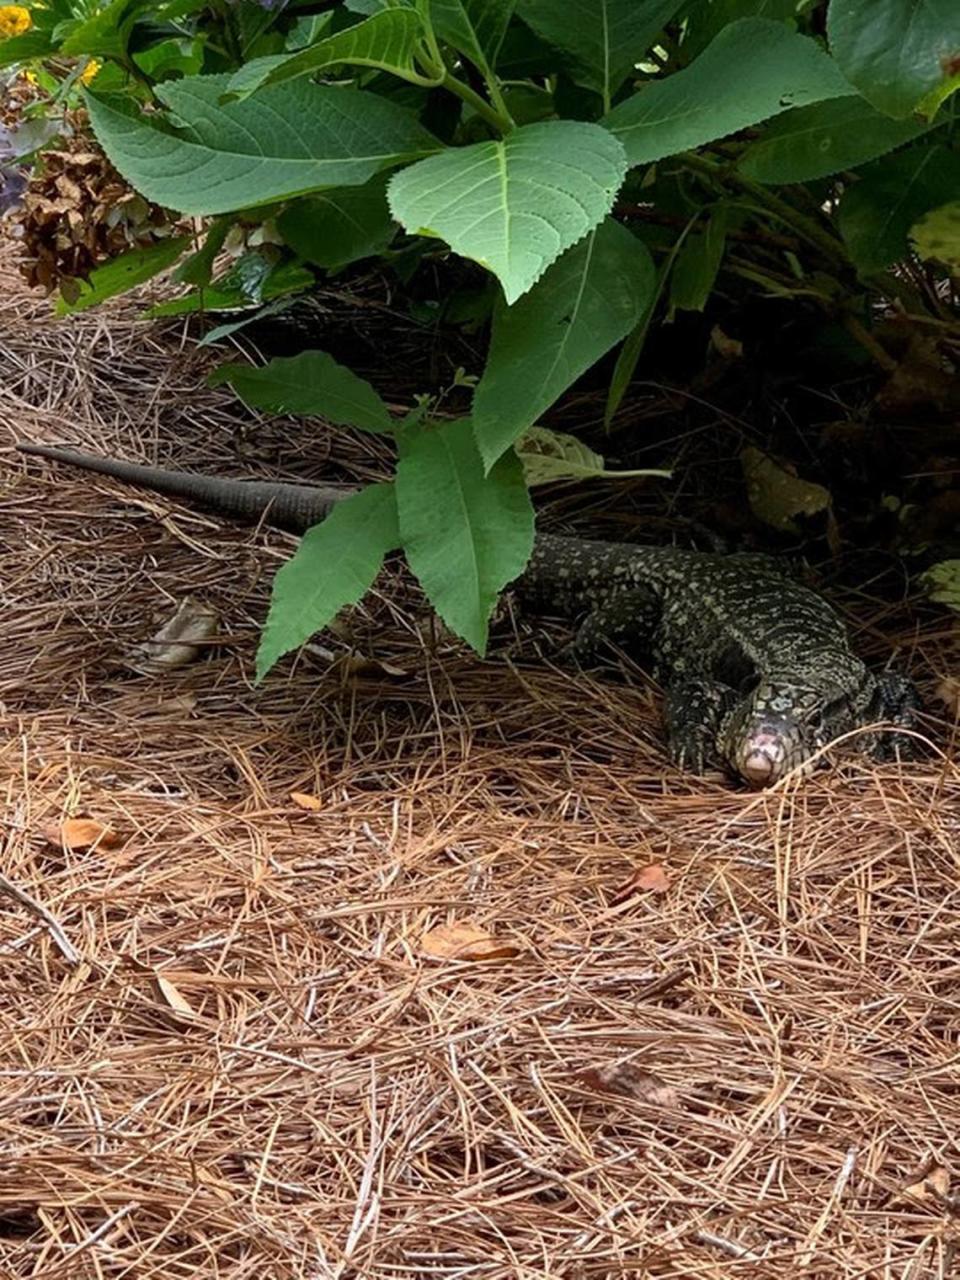 The South Carolina Department of Natural Resources confirmed eight more sightings of the non-native black and white tegus, including this one spotted by a homeowner, since the initial report from Lexington County in August.